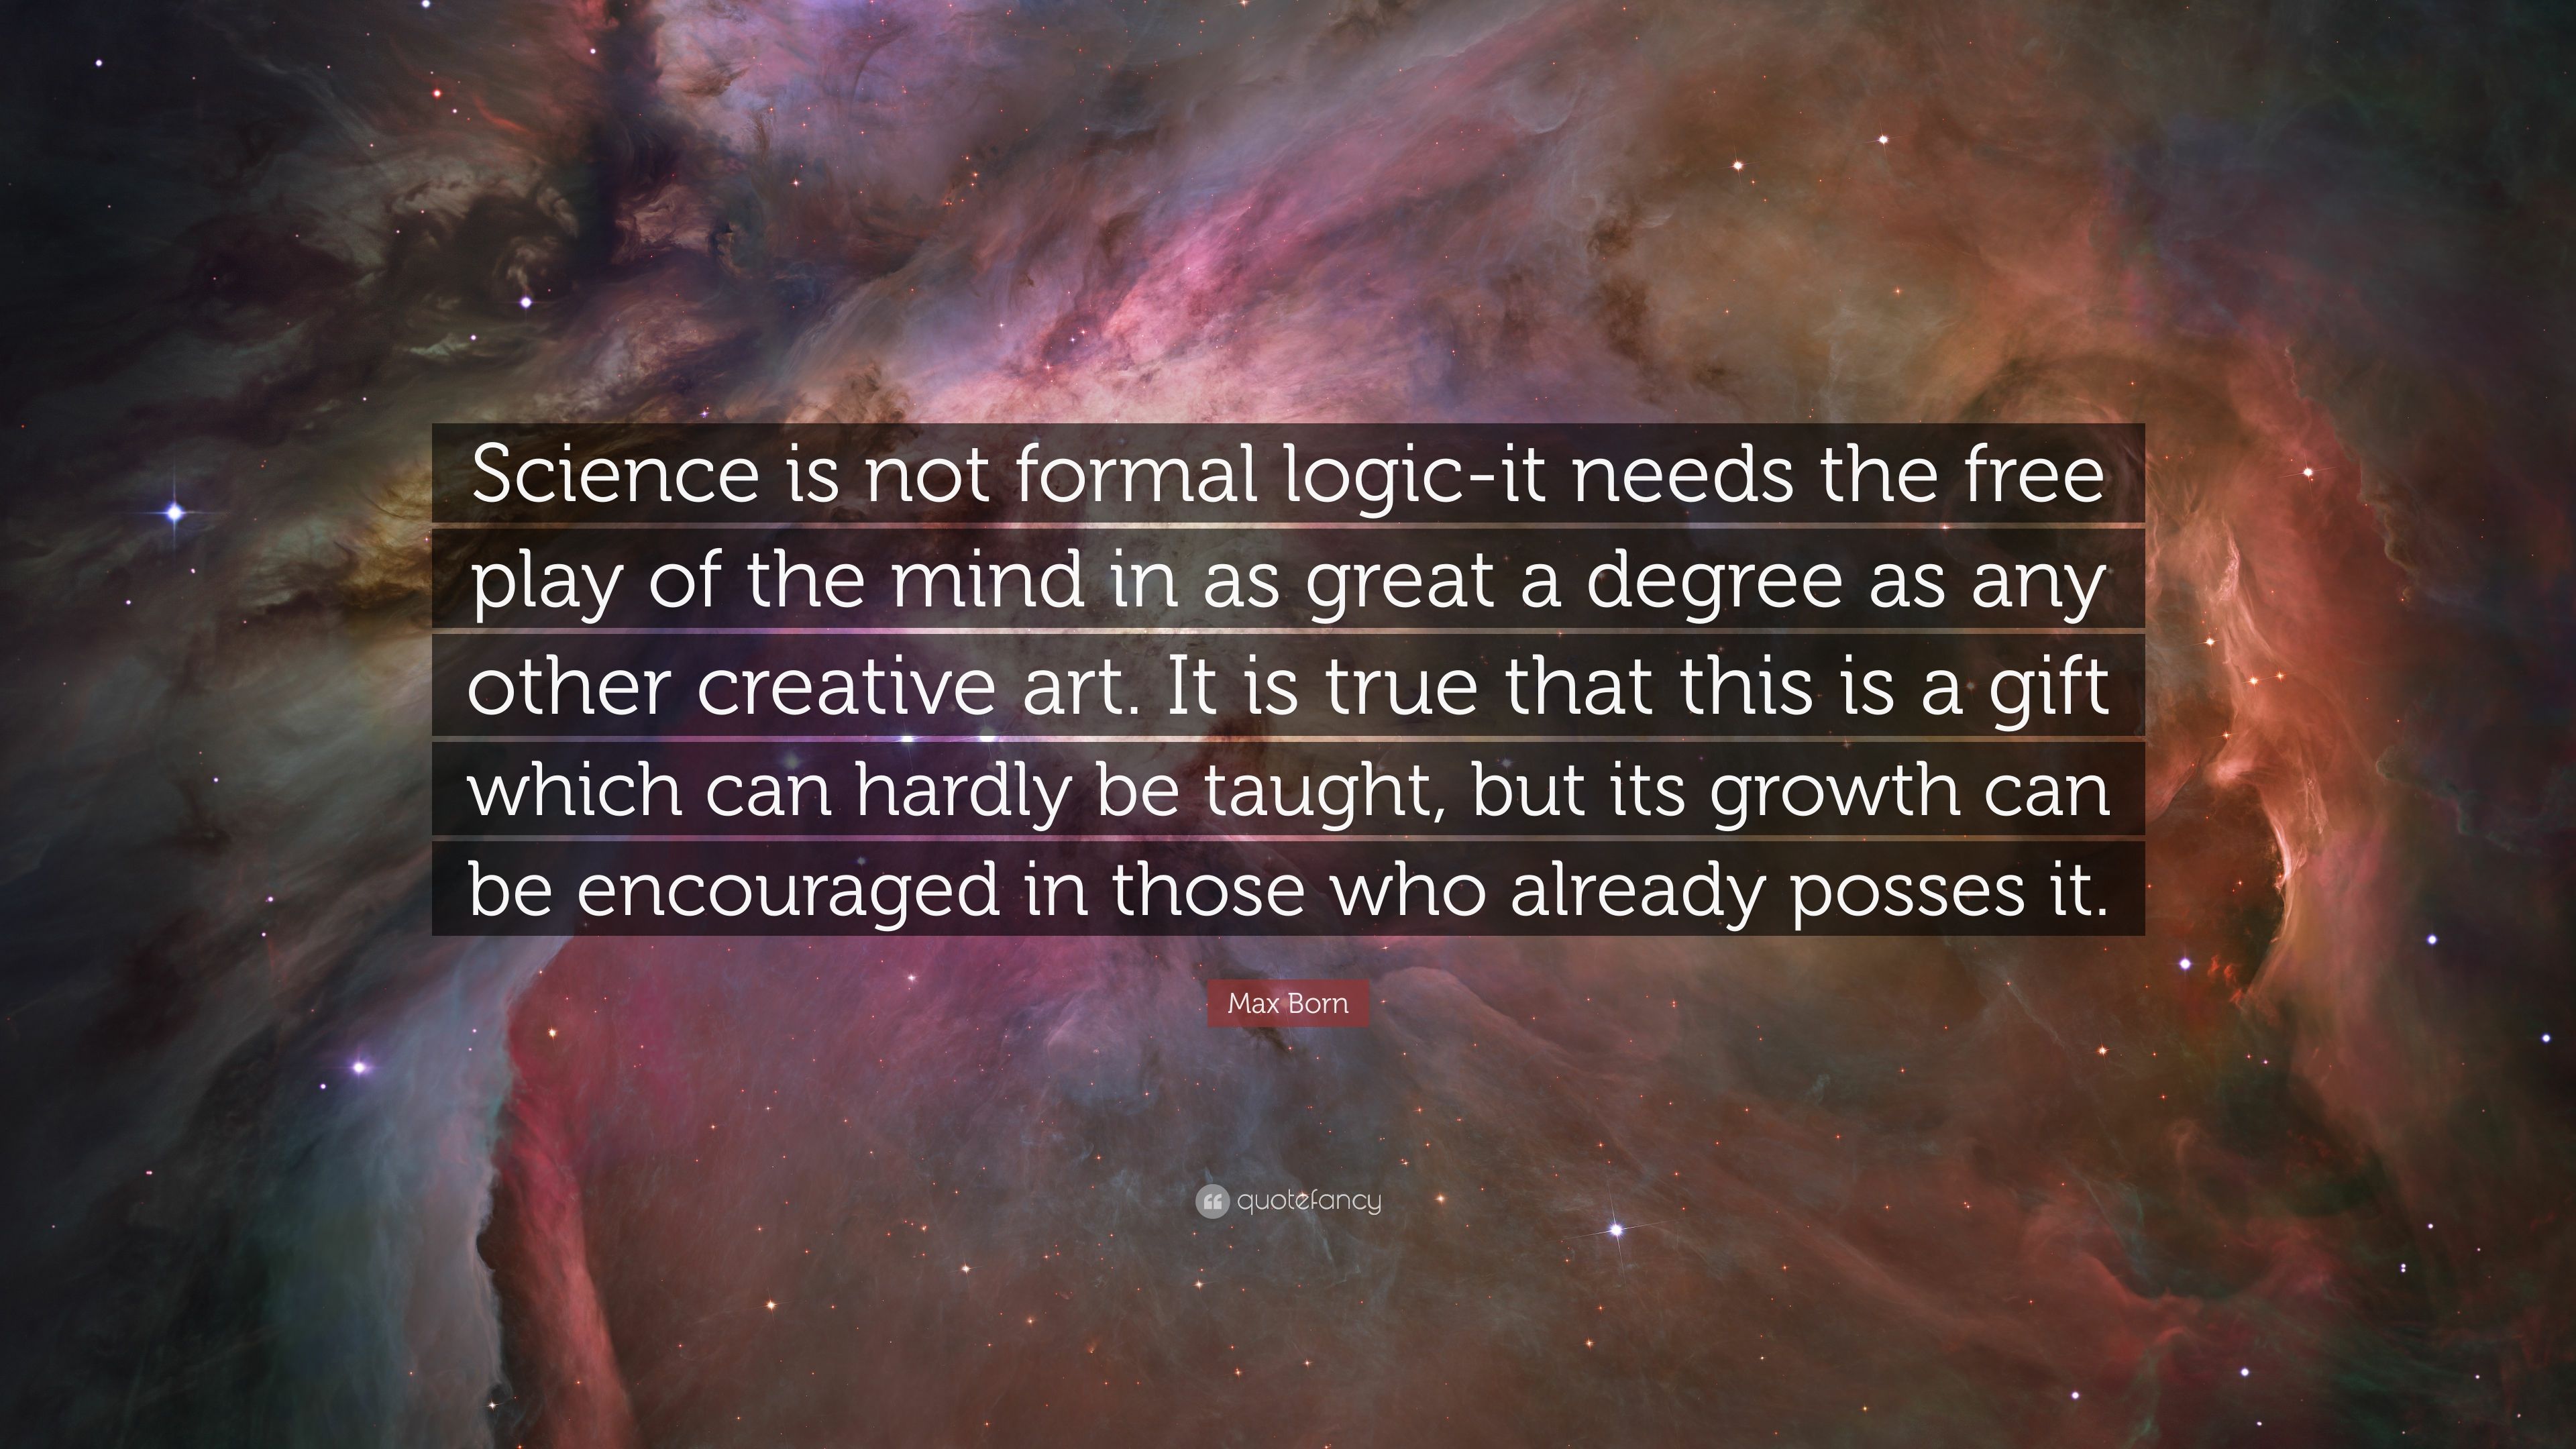 Max born quote âscience is not formal logic